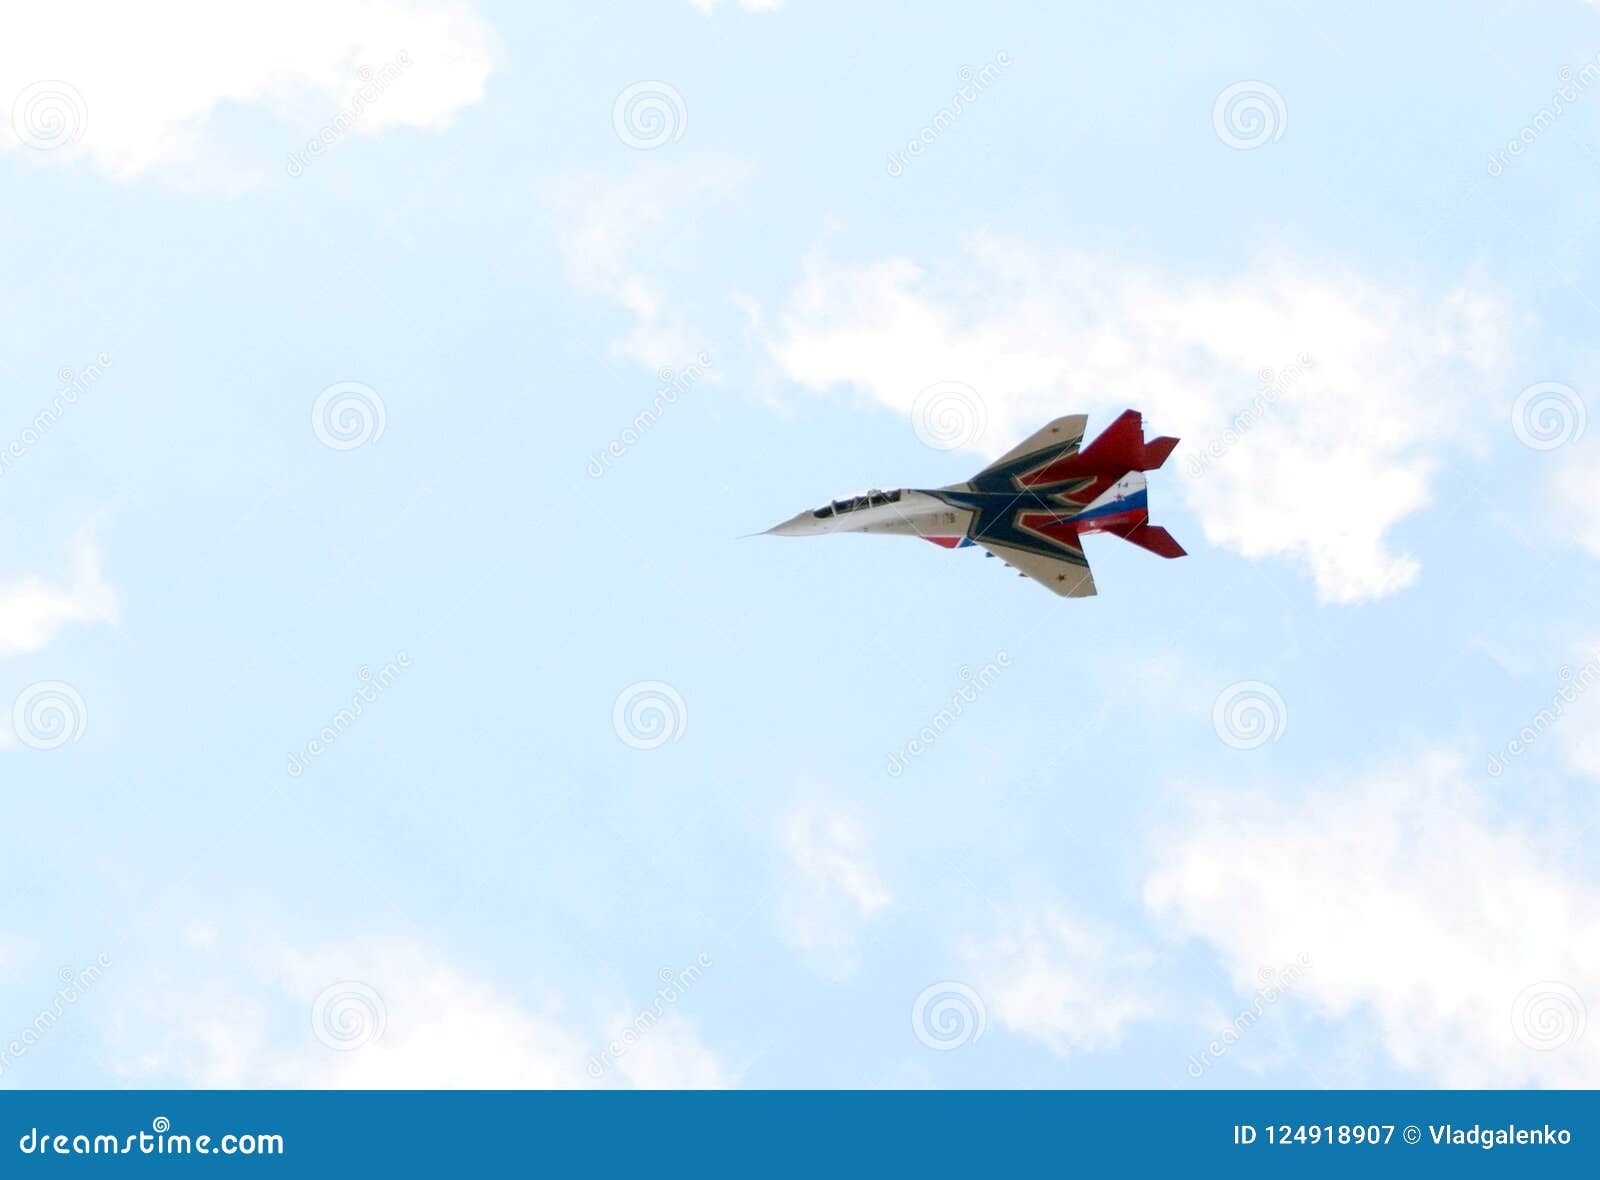 multipurpose highly maneuverable mig-29 fighter from the strizhi aerobatic team over the myachkovo airfield